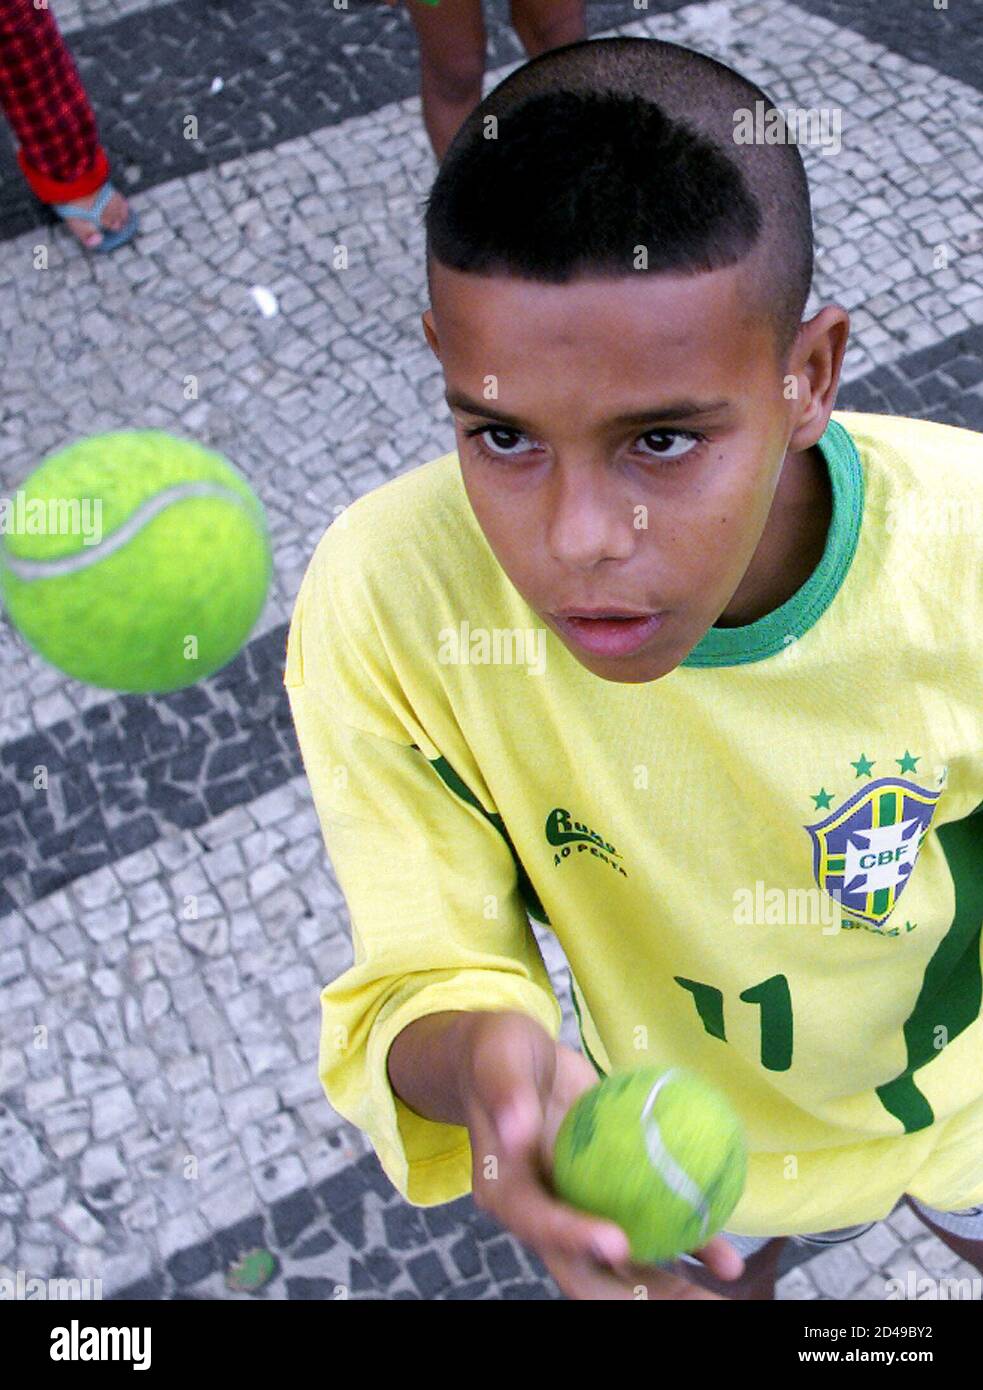 Fabiano de Lima, 15, sporting the hair style of Brazilian soccer star  Ronaldo, juggles tennis balls after [Brazil defeated Germany 2-0] in the  World Cup Final, in Rio de Janeiro June 30,